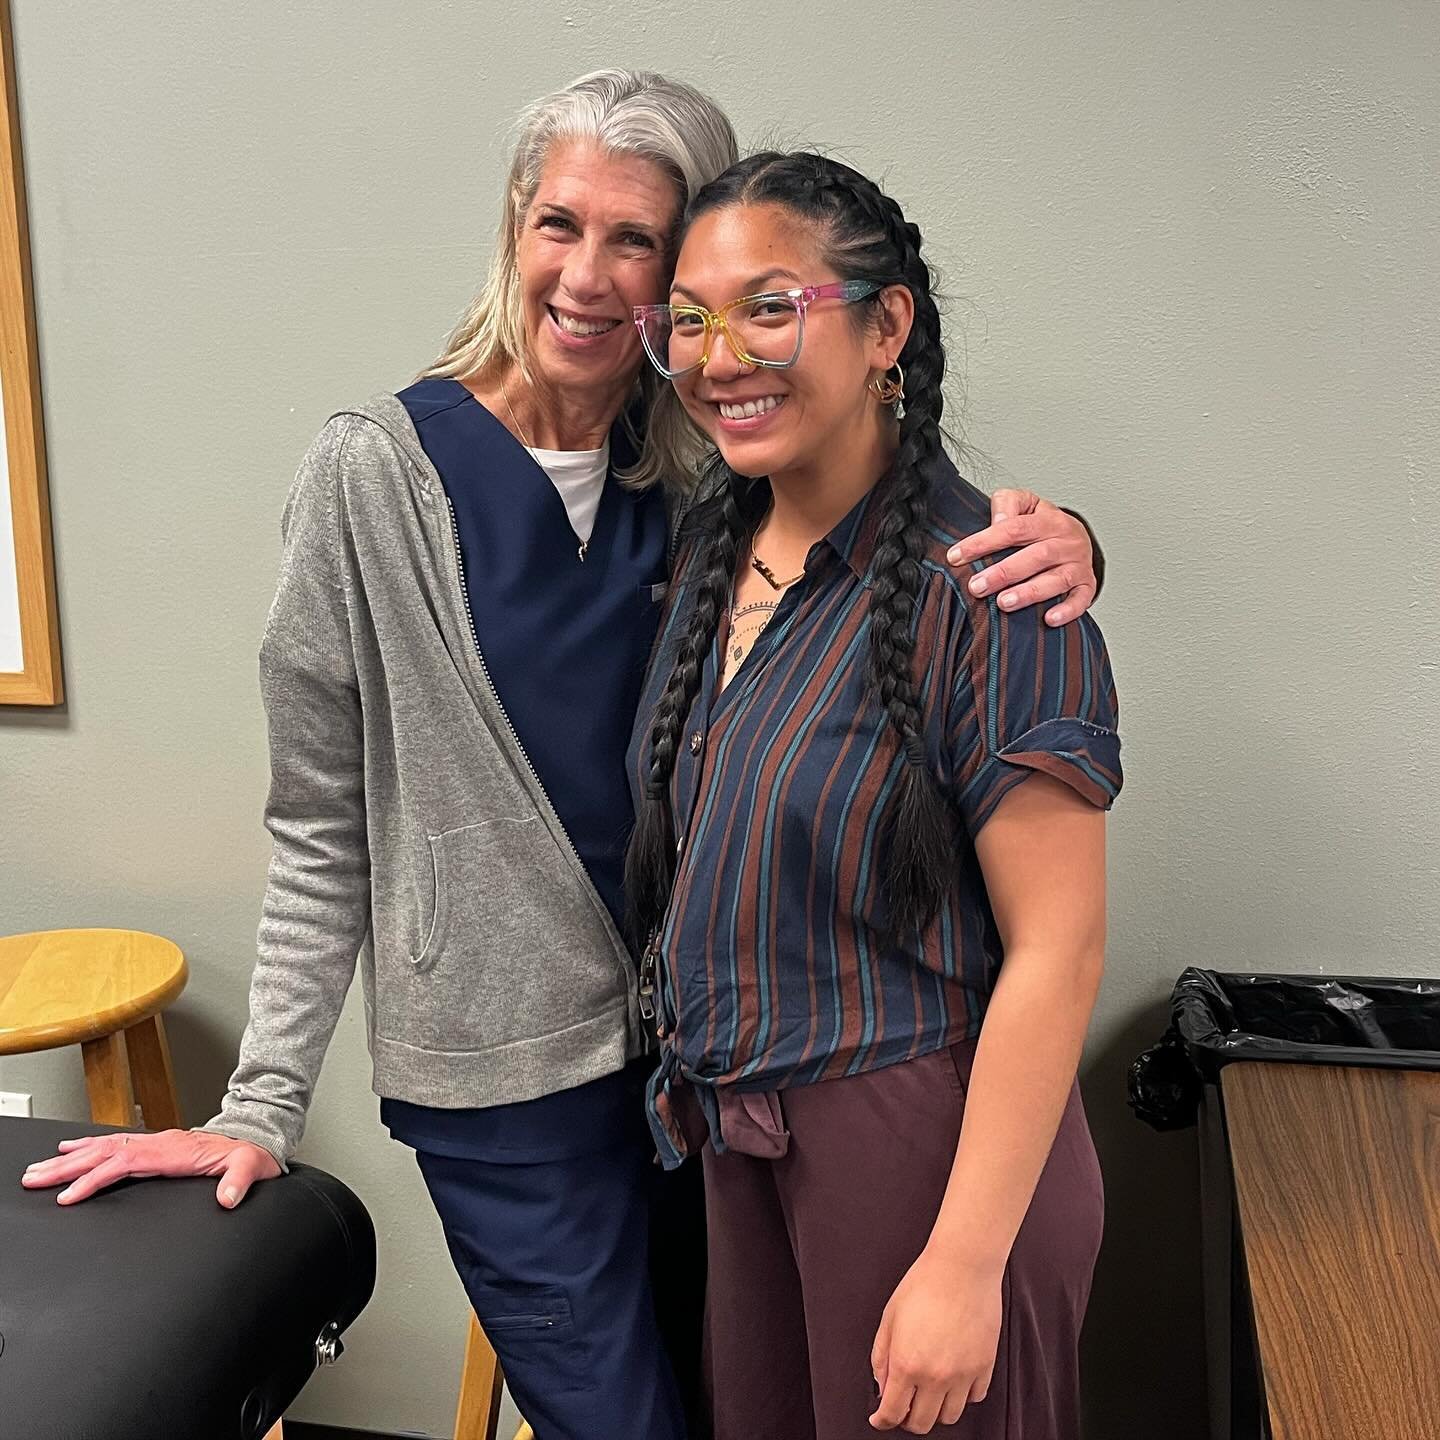 They weren&rsquo;t lying when they said that CEUs are truly where you get to the nitty gritty of how you want to transmute the medicine of acupuncture.

For the past thirteen weeks, I have been learning from a variety of different teachers through Pa